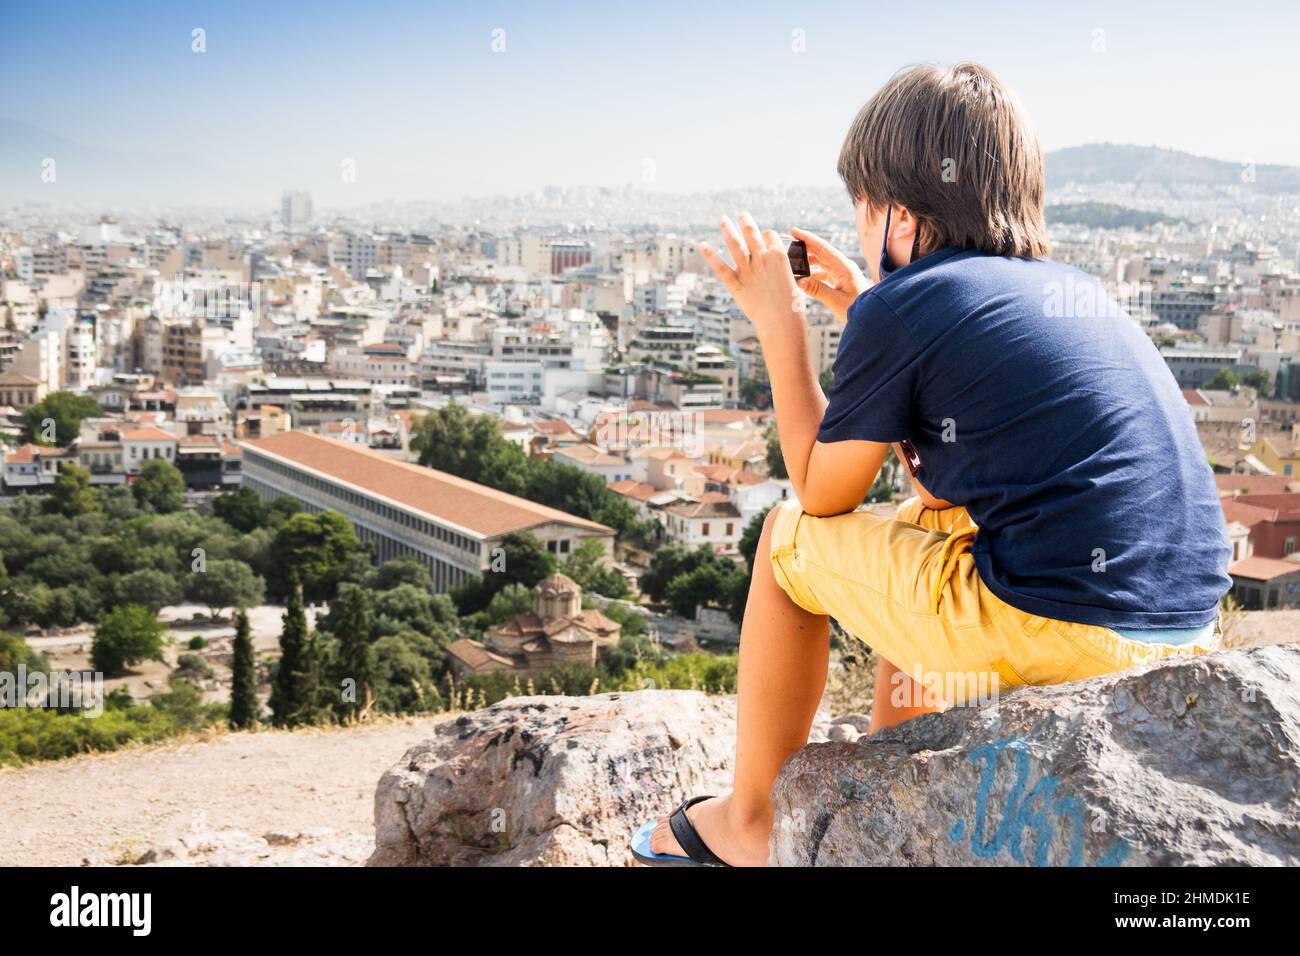 Rear view of boy sitting on stone and photographing cityscape, Athens, Greece Stock Photo